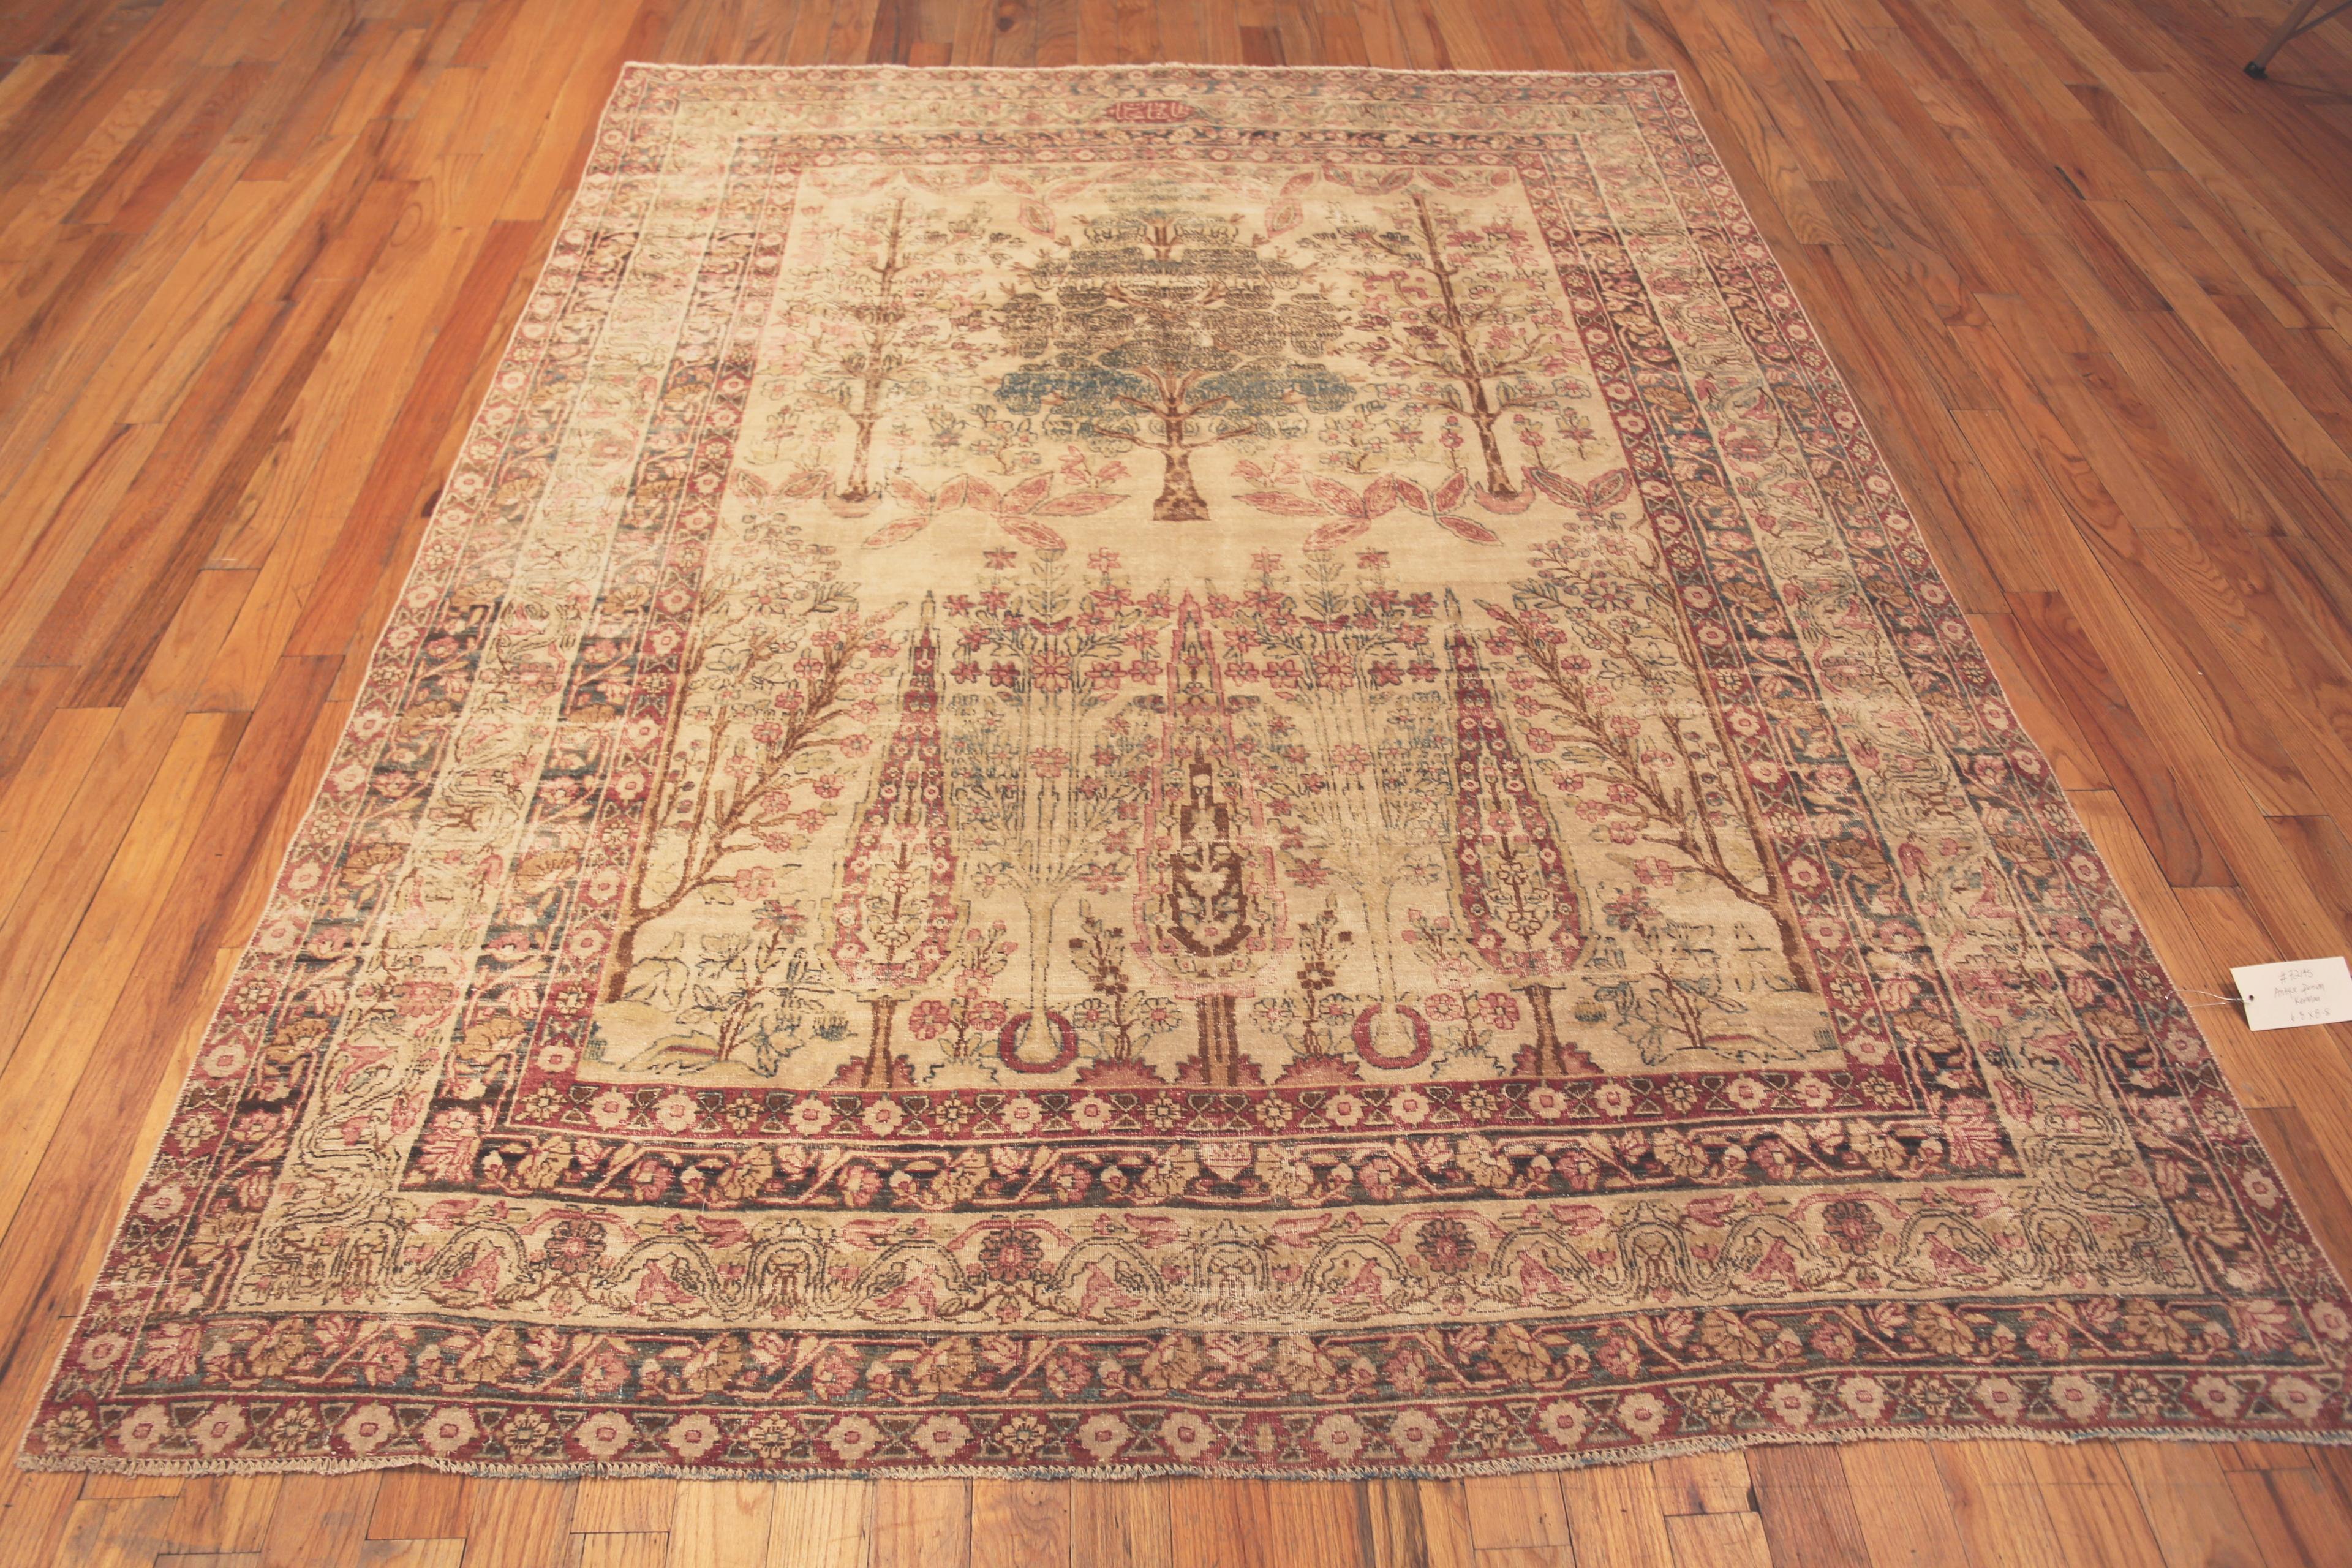 Fine Floral Antique Persian Kerman Tree Of Life Rug Signed “Taftanchian”. Country of Origin: Persia, Circa date: 1900. Size: 6 ft 8 in x 8 ft 8 in (2.03 m x 2.64 m)

